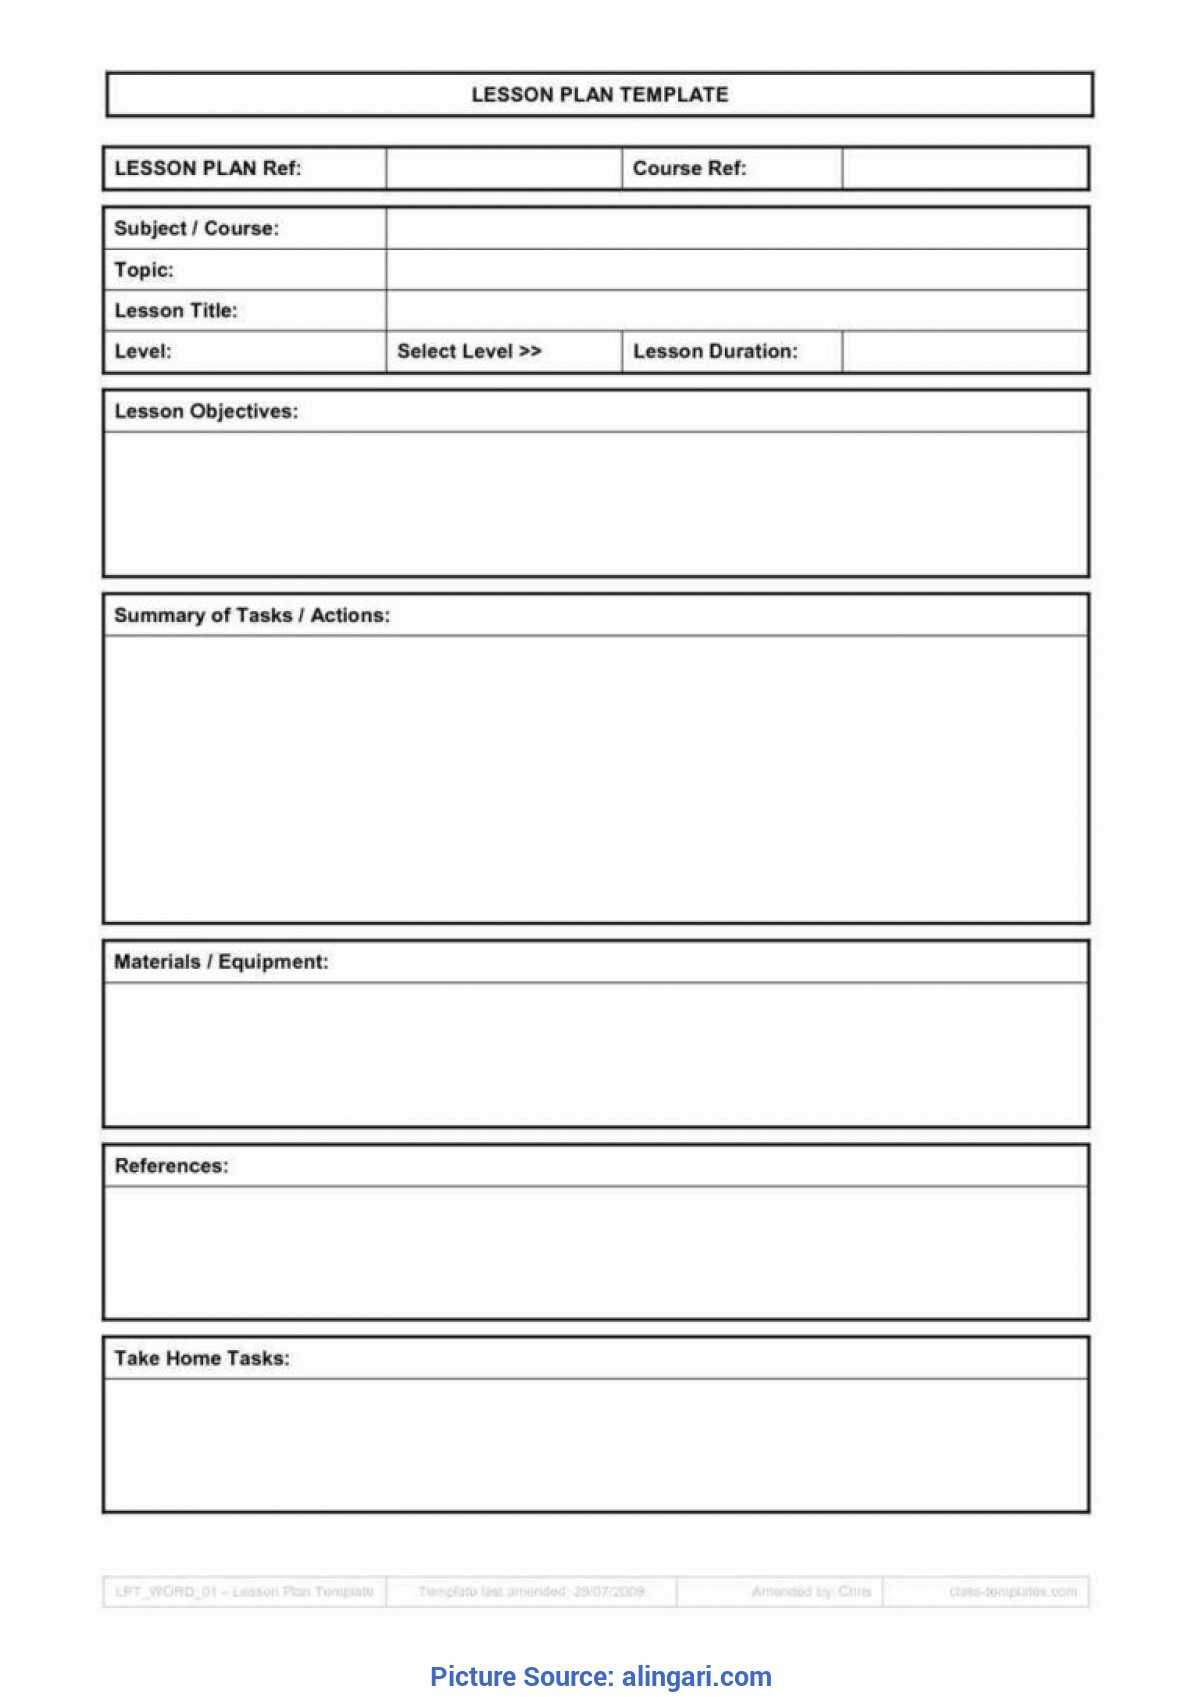 Prince2 Lessons Learned Report Template New 5 Lessons Le Inside Prince2 Lessons Learned Report Template